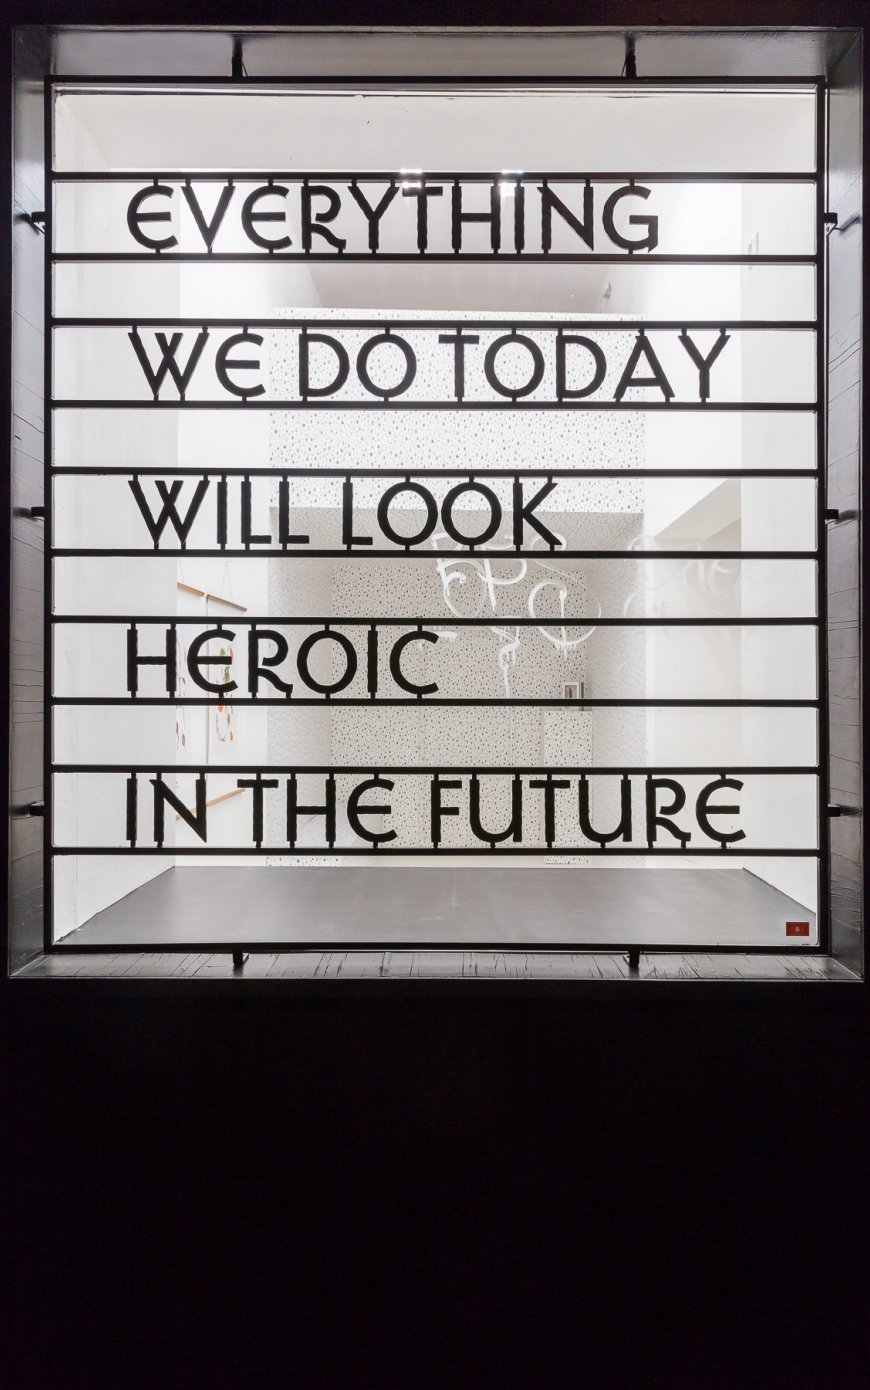 Jasmina Cibic, Everything We Do Today Will Look Heroic in The Future, 2018, iron, 177 x 158 x 6 cm